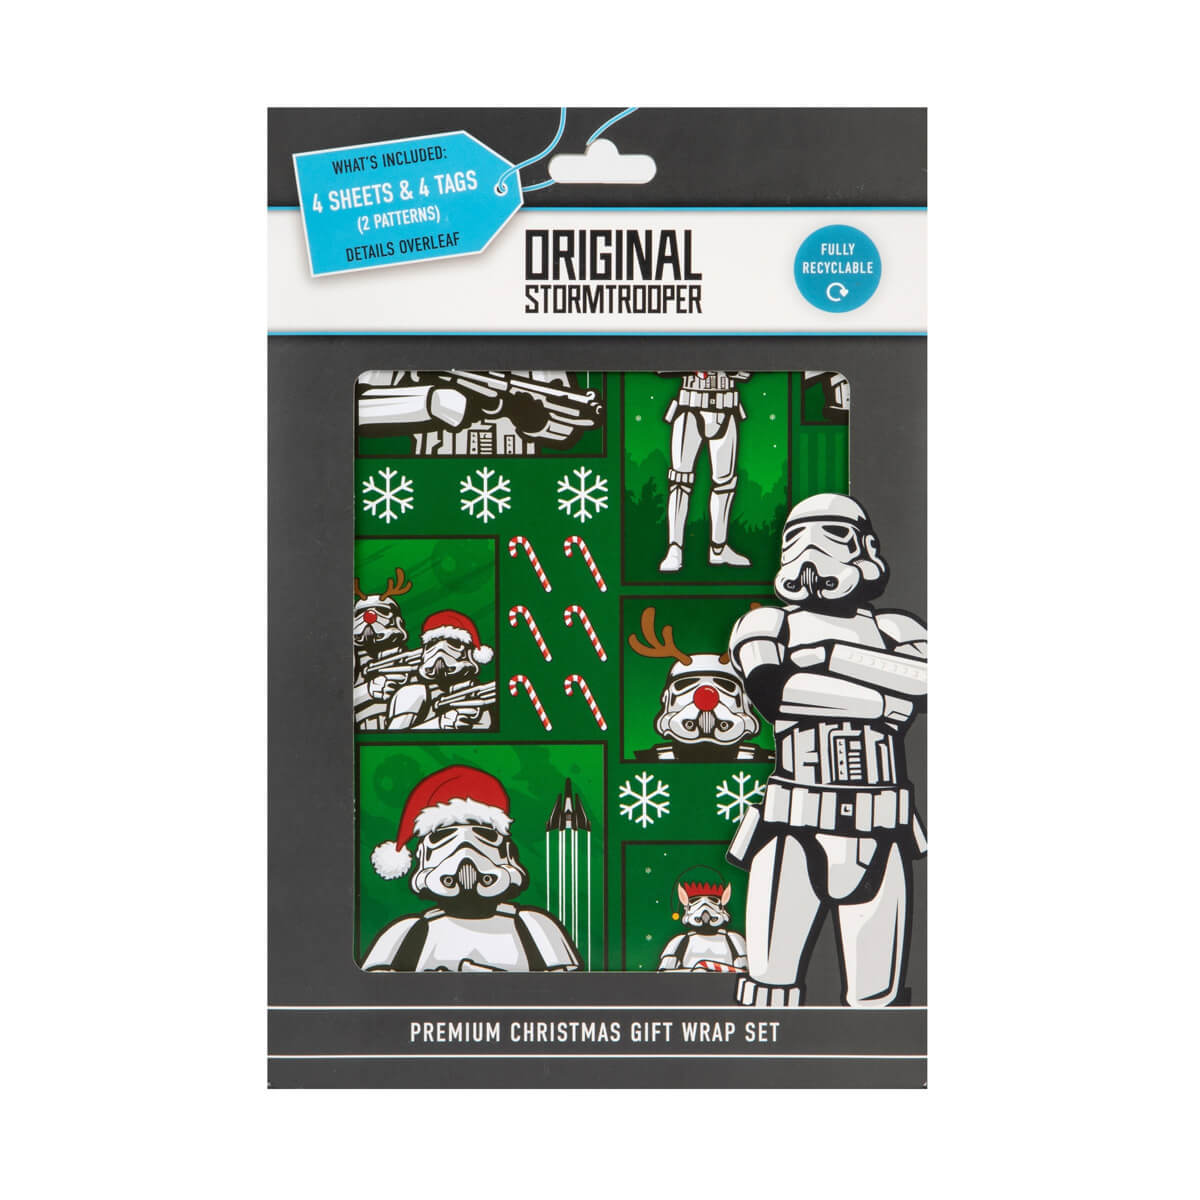 Original Stormtrooper Christmas Gift Wrap Pack of 4 - includes 4 sheets and 4 gift tags - close image of christmas wrapping paper